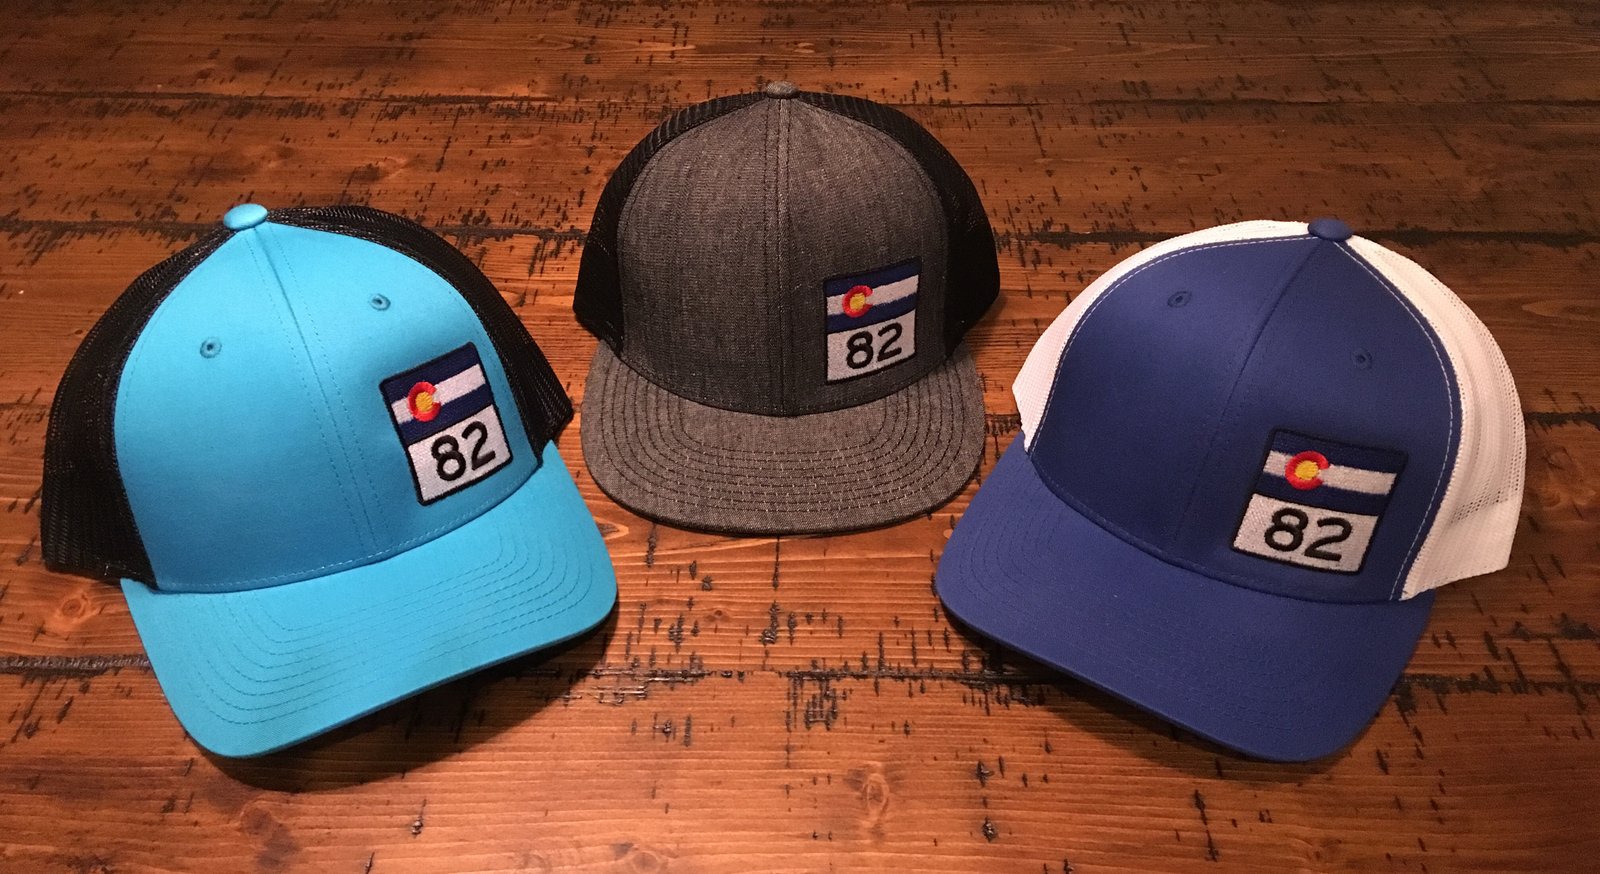 Hats | The Highway 82 Clothing Co.